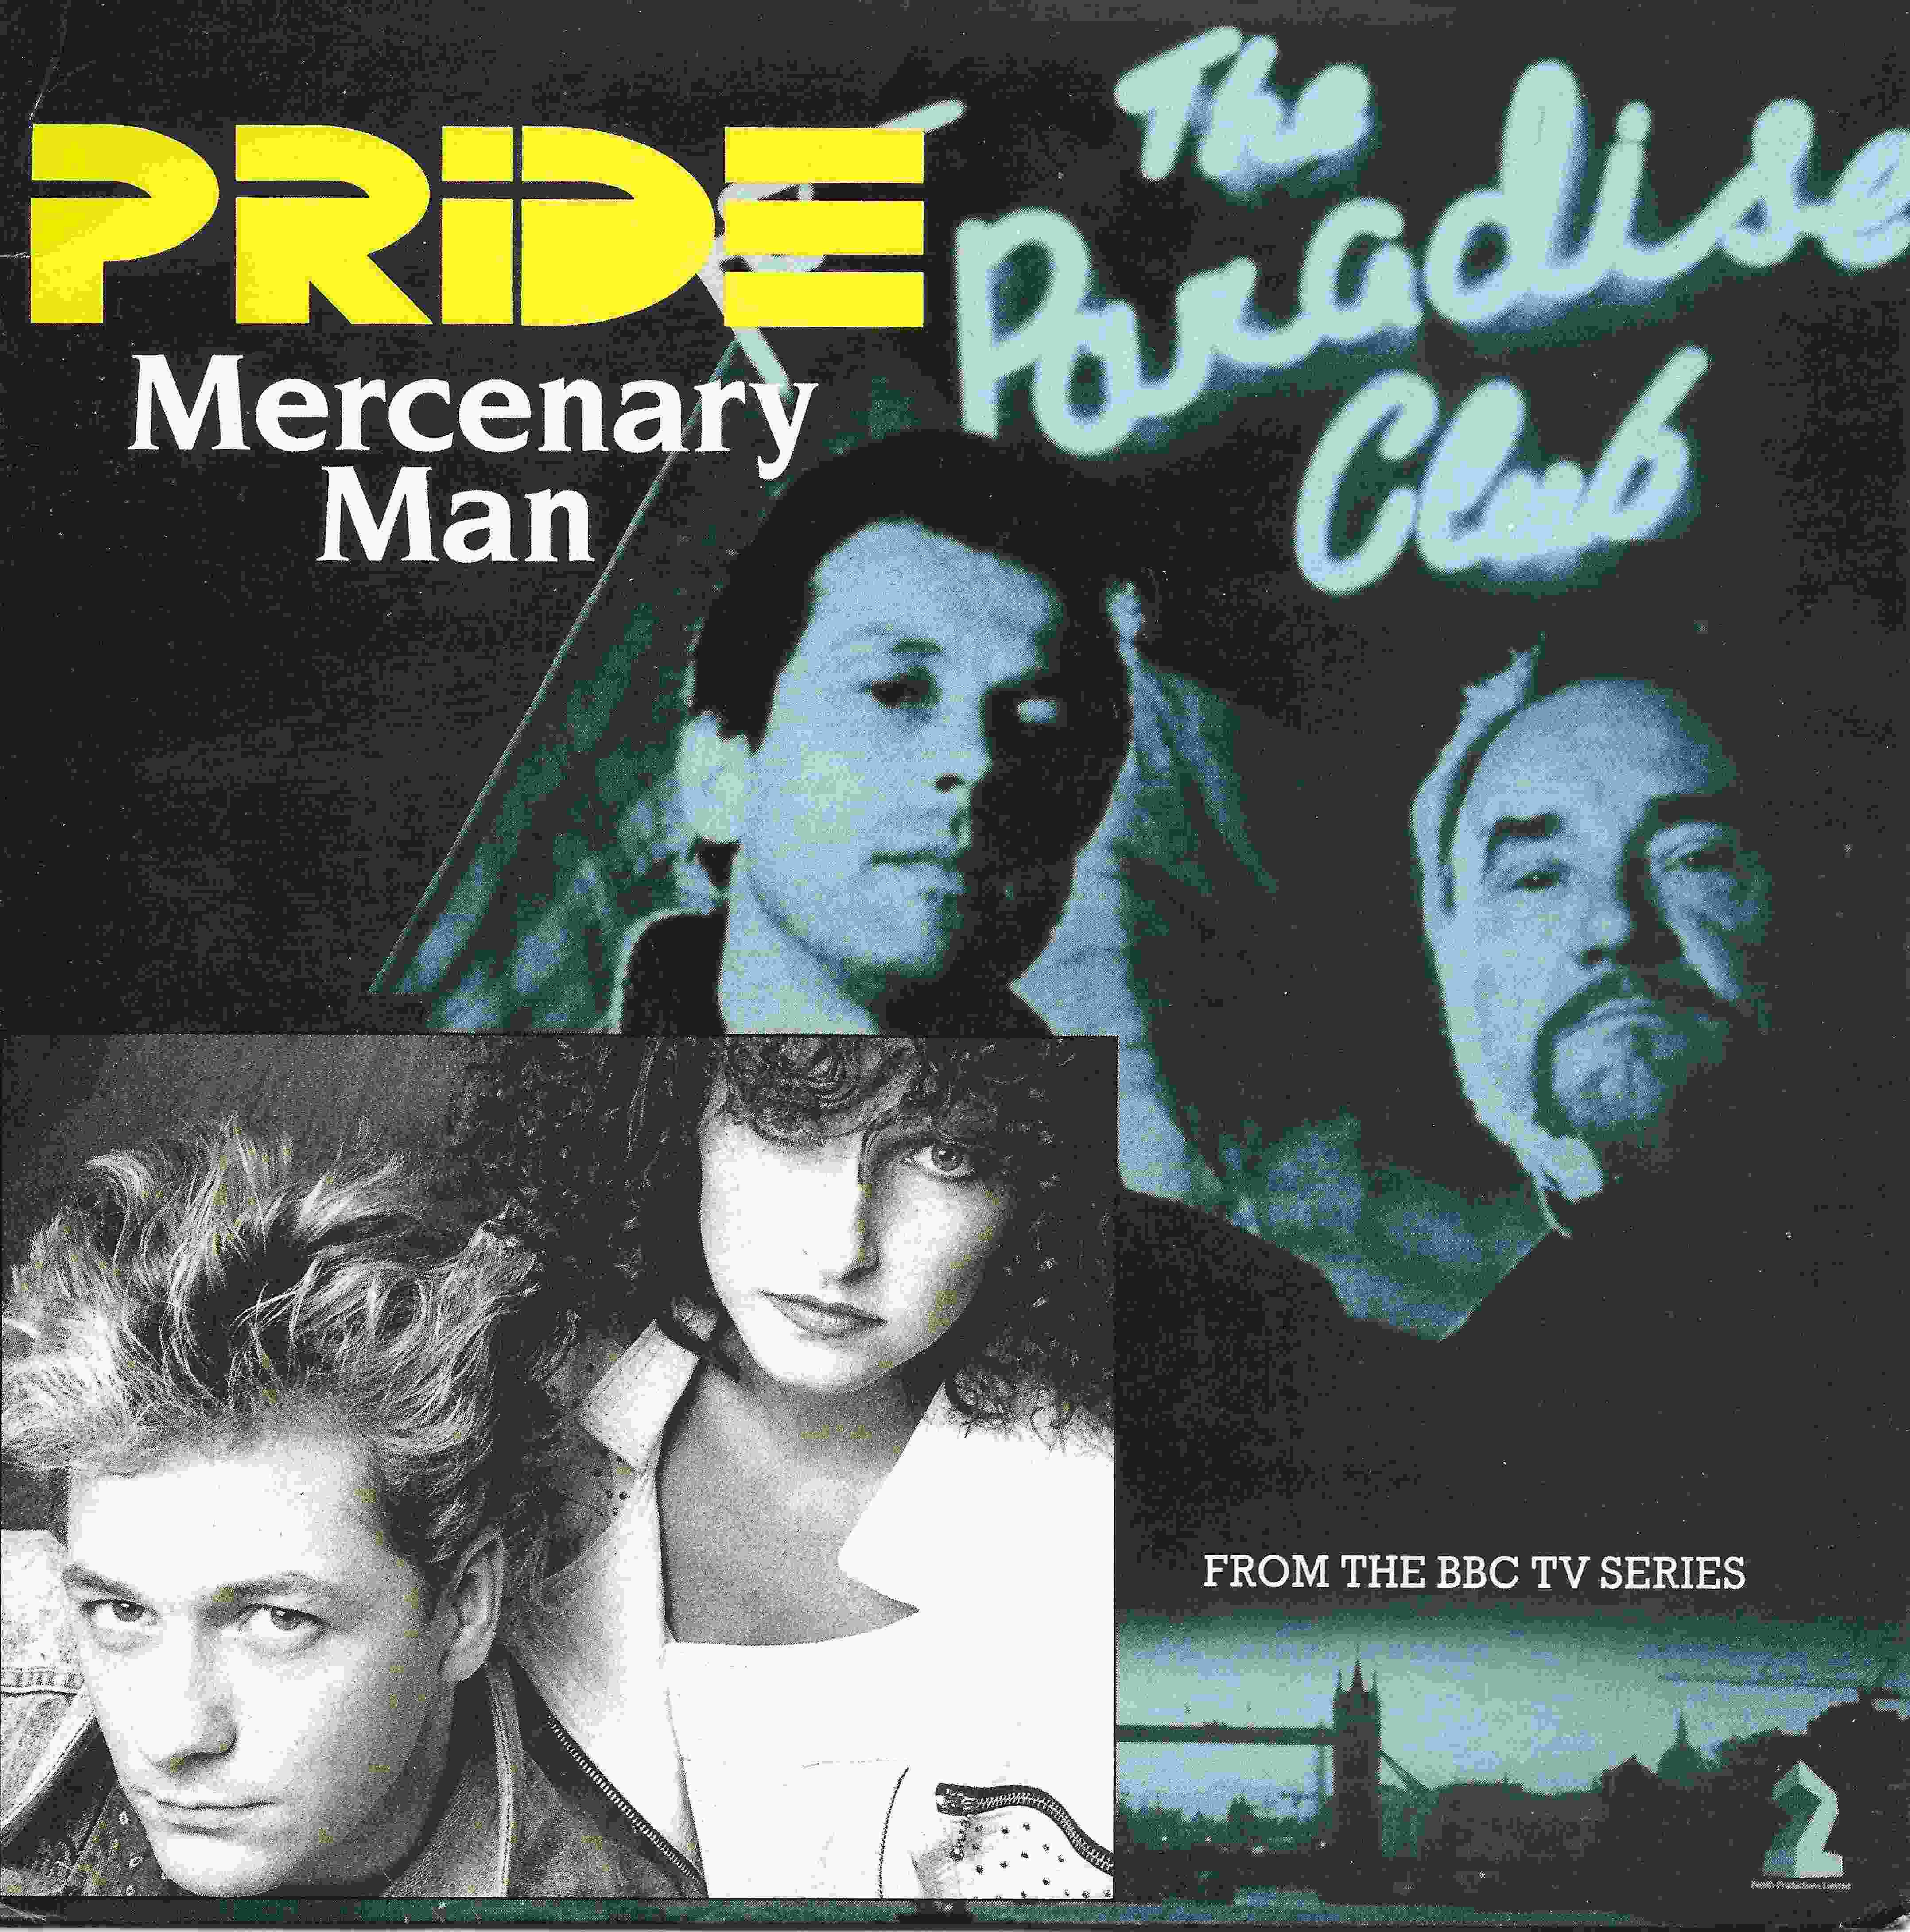 Picture of Mercenary man (The paradise club) by artist MacDonald / Madigan / King / Pride from the BBC singles - Records and Tapes library